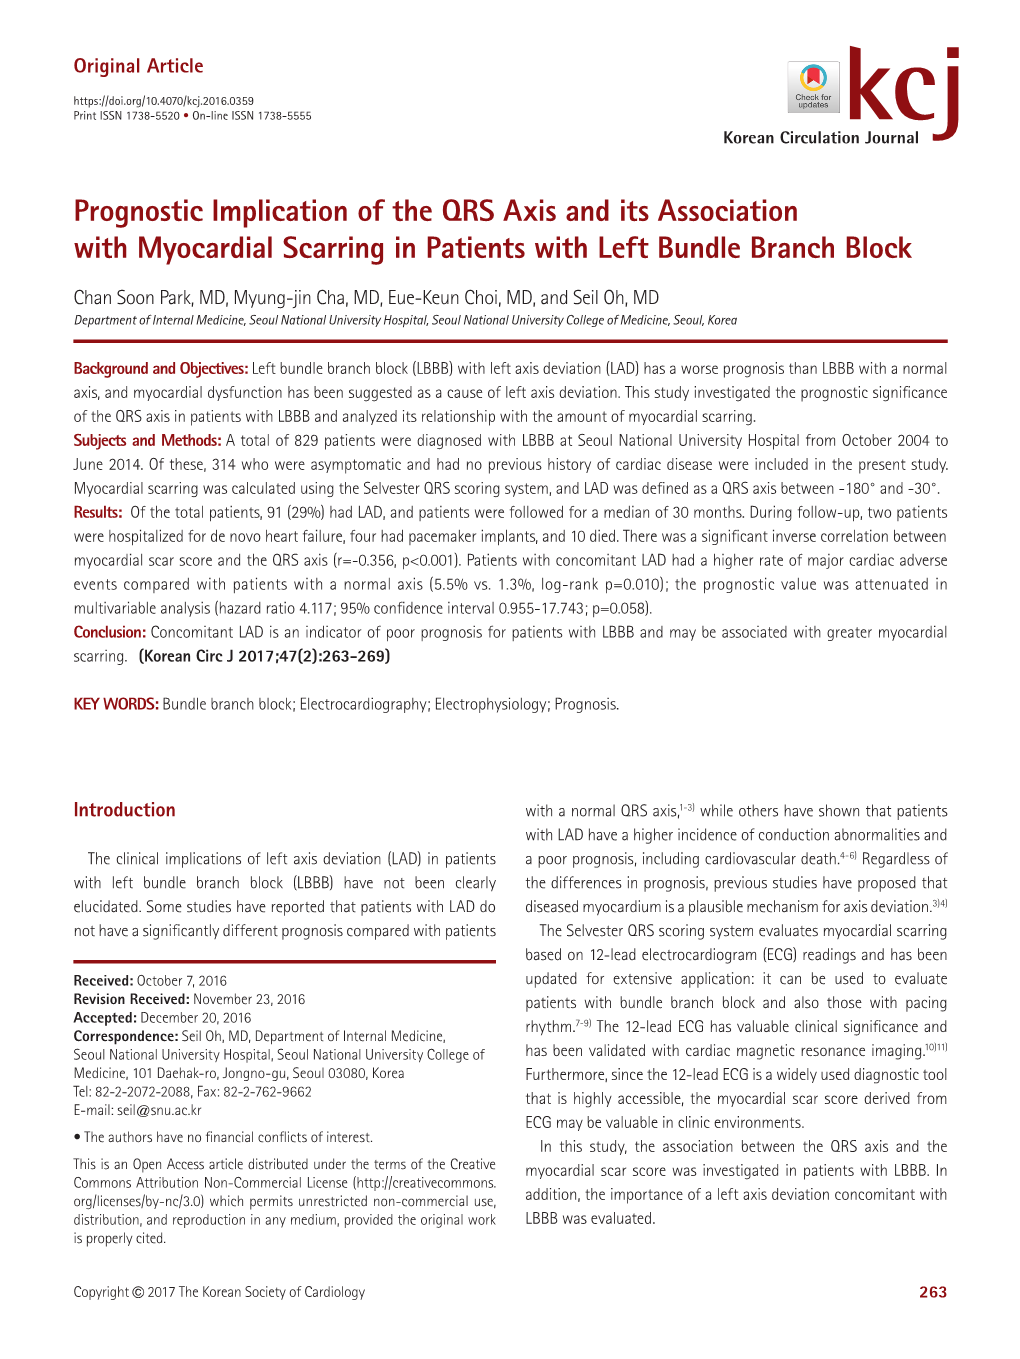 Prognostic Implication of the QRS Axis and Its Association with Myocardial Scarring in Patients with Left Bundle Branch Block